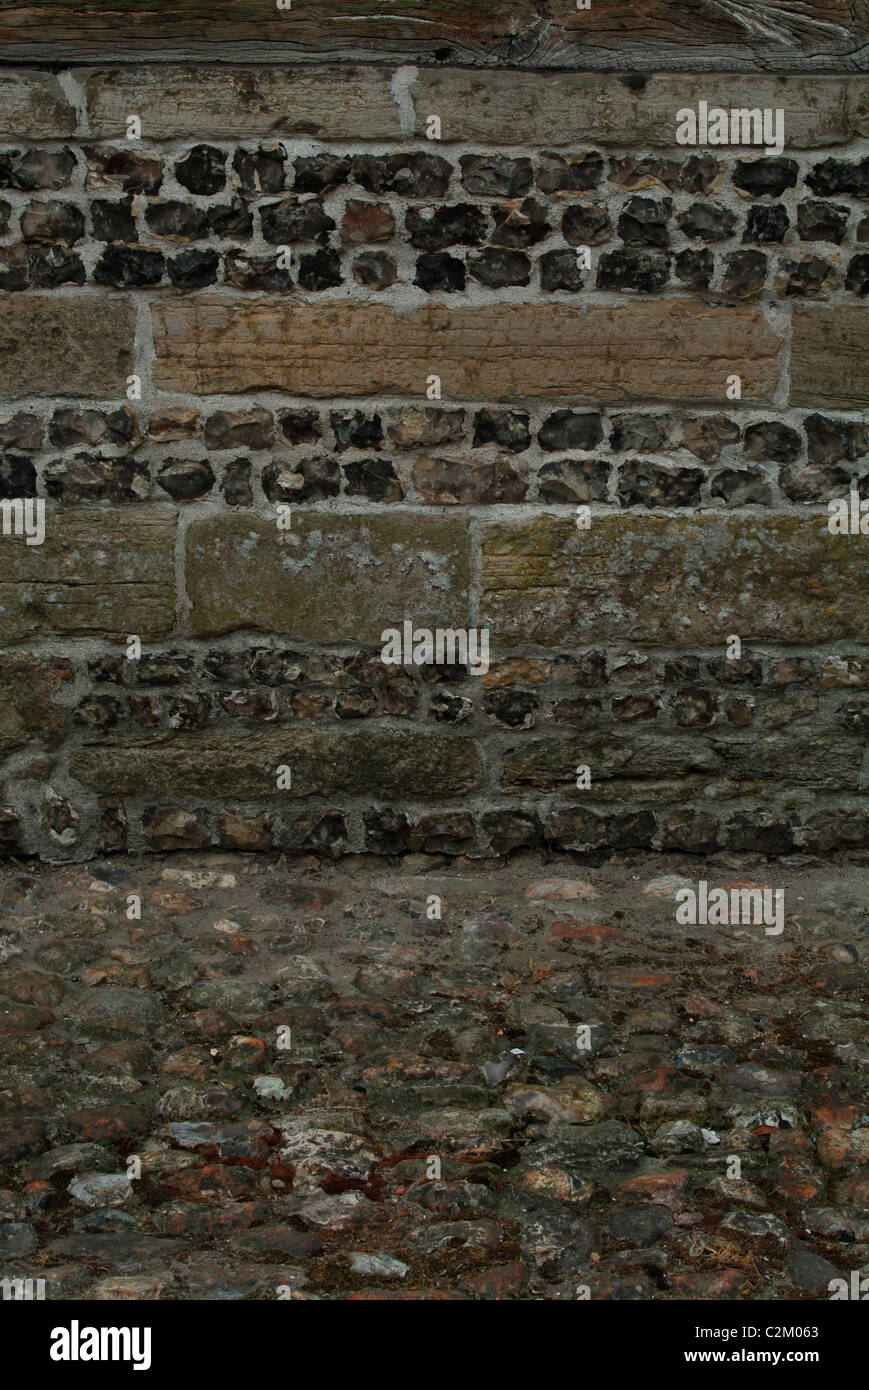 Backgrounds - detail of stratas on stone and flint wall Stock Photo